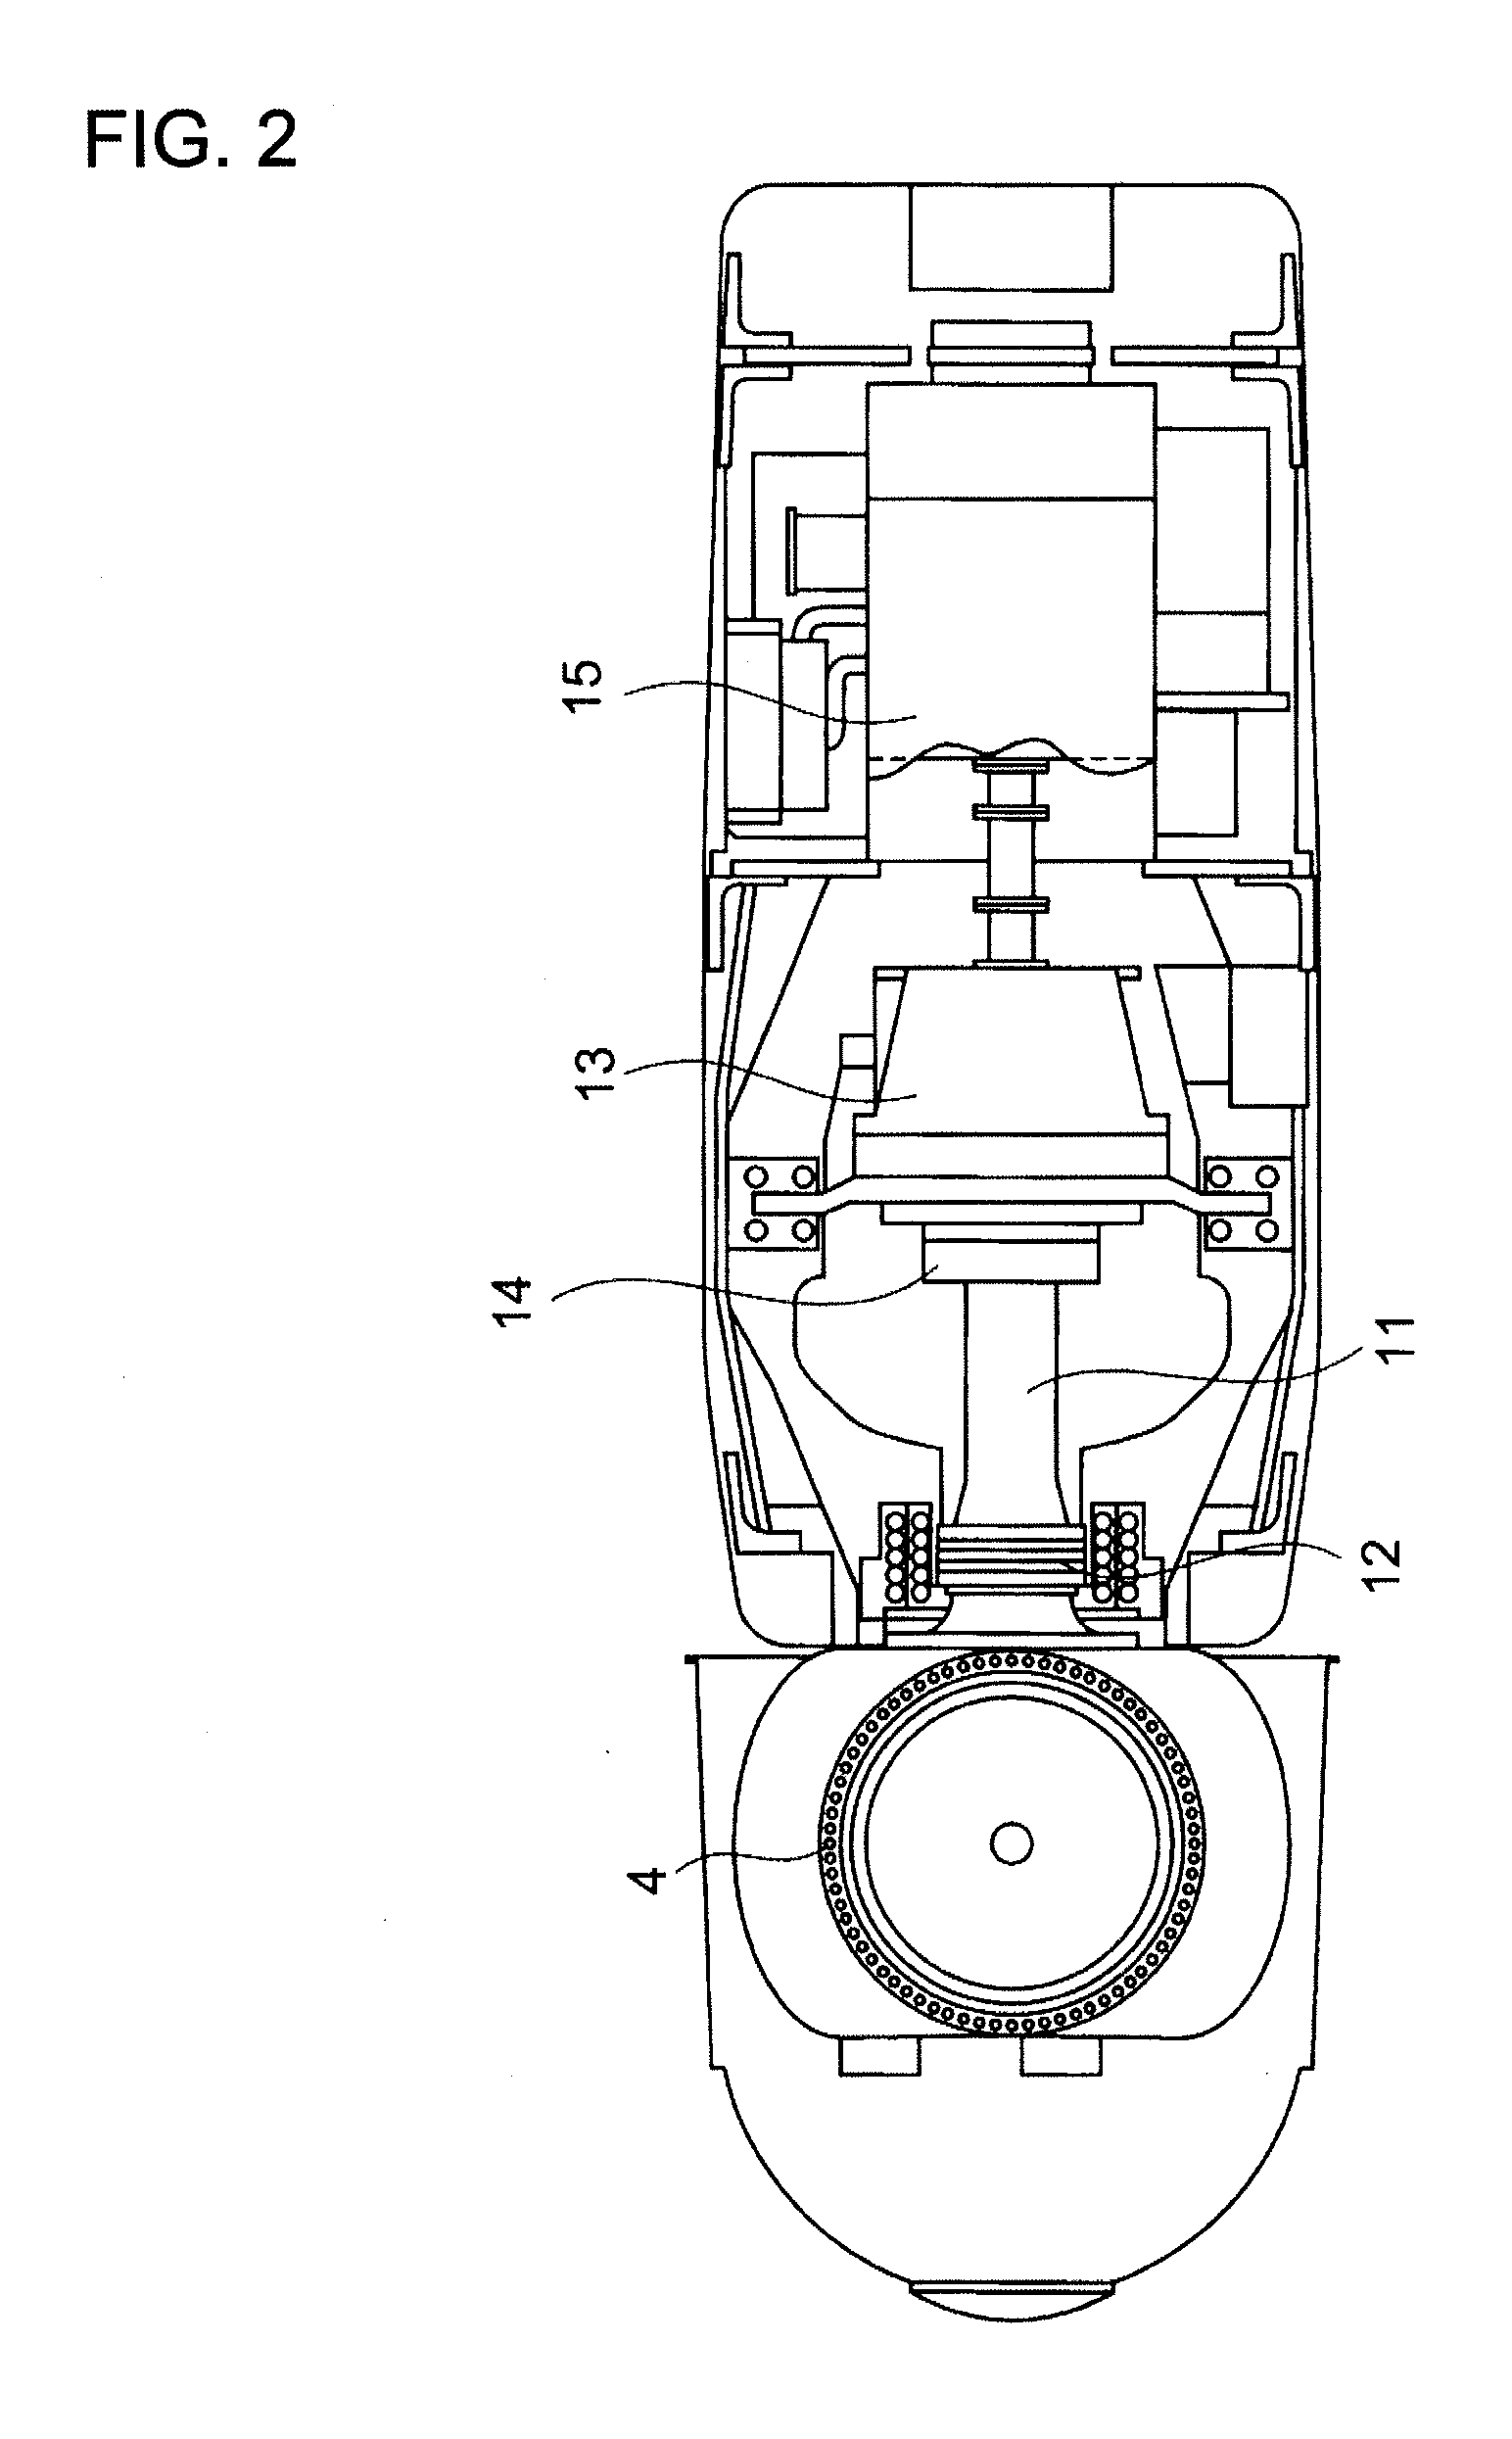 Seal structure of mechanical device and wind turbine generator